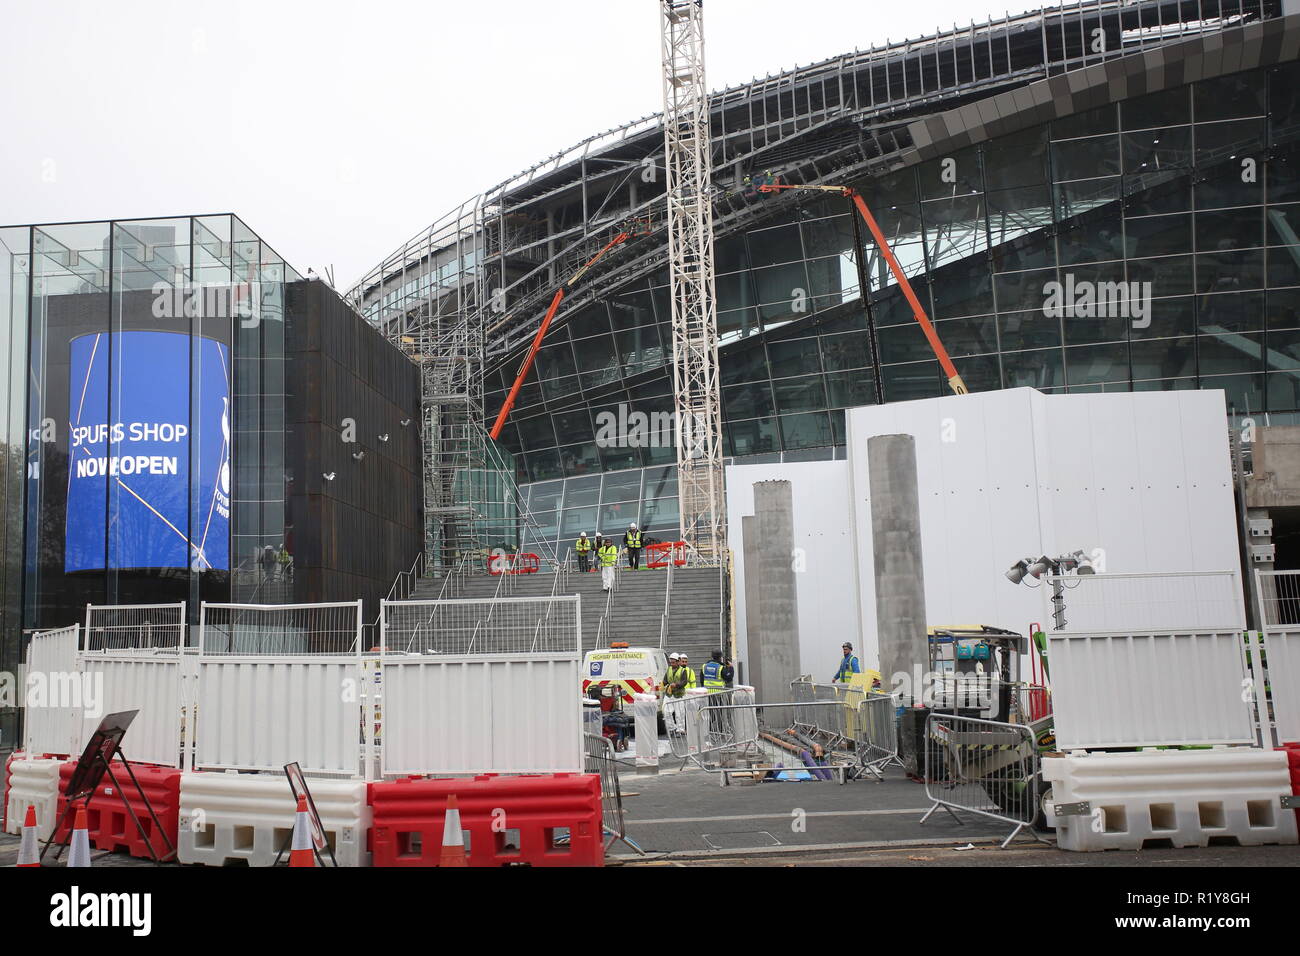 London, UK. 15th Nov 2018.Tottenham Hotspur Football Club's new 62,000 seater stadium still appears to need alot more work before Premiership football can be played at the North London venue. The club is still having to play it's home games at the National Stadium in Wembley also in North London. Credit: Nigel Bowles/Alamy Live News Stock Photo